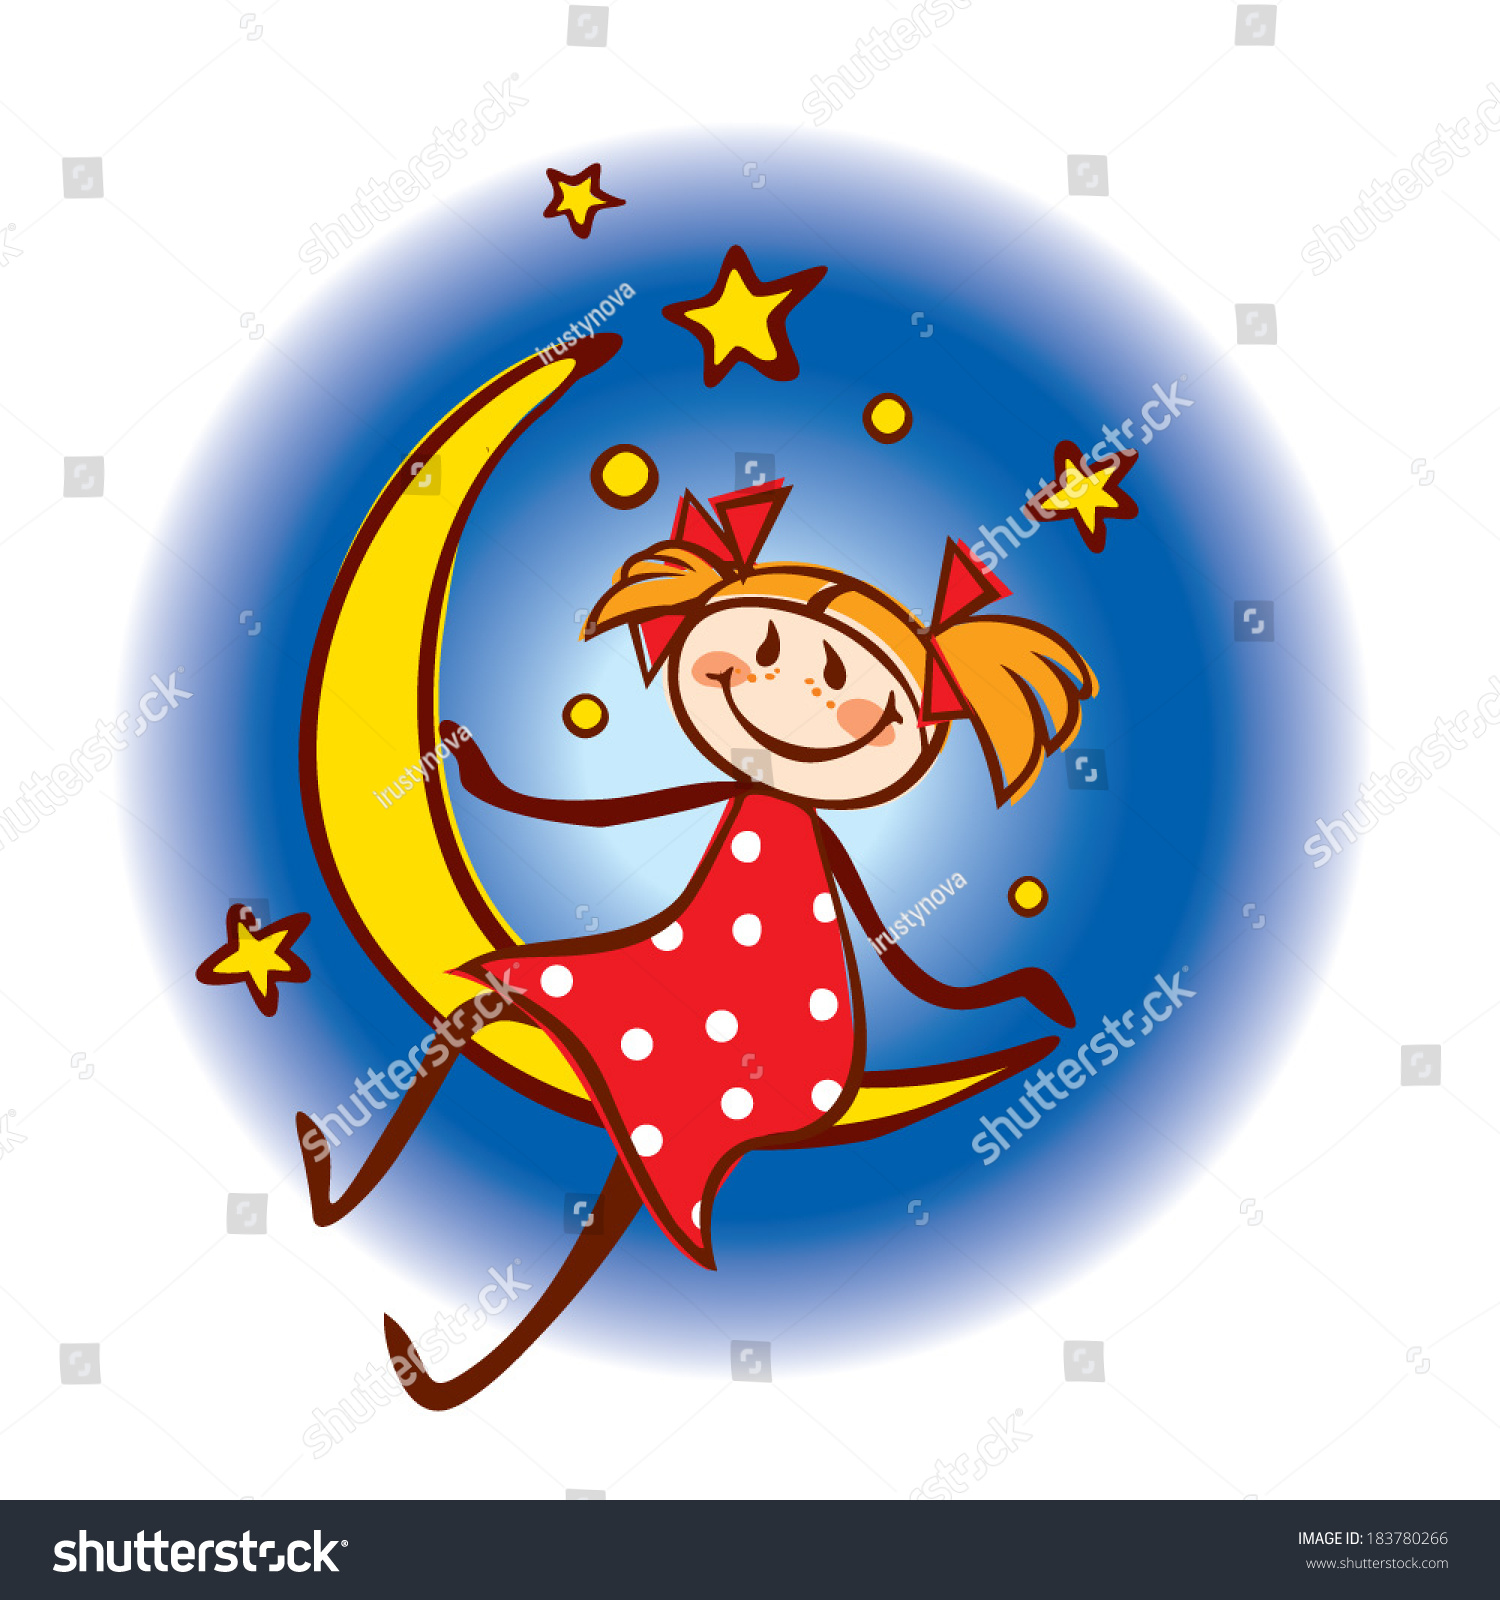 SVG of Girl sitting on the month in the red dress with white polka dots, dangling his feet, against the dark sky and stars. svg